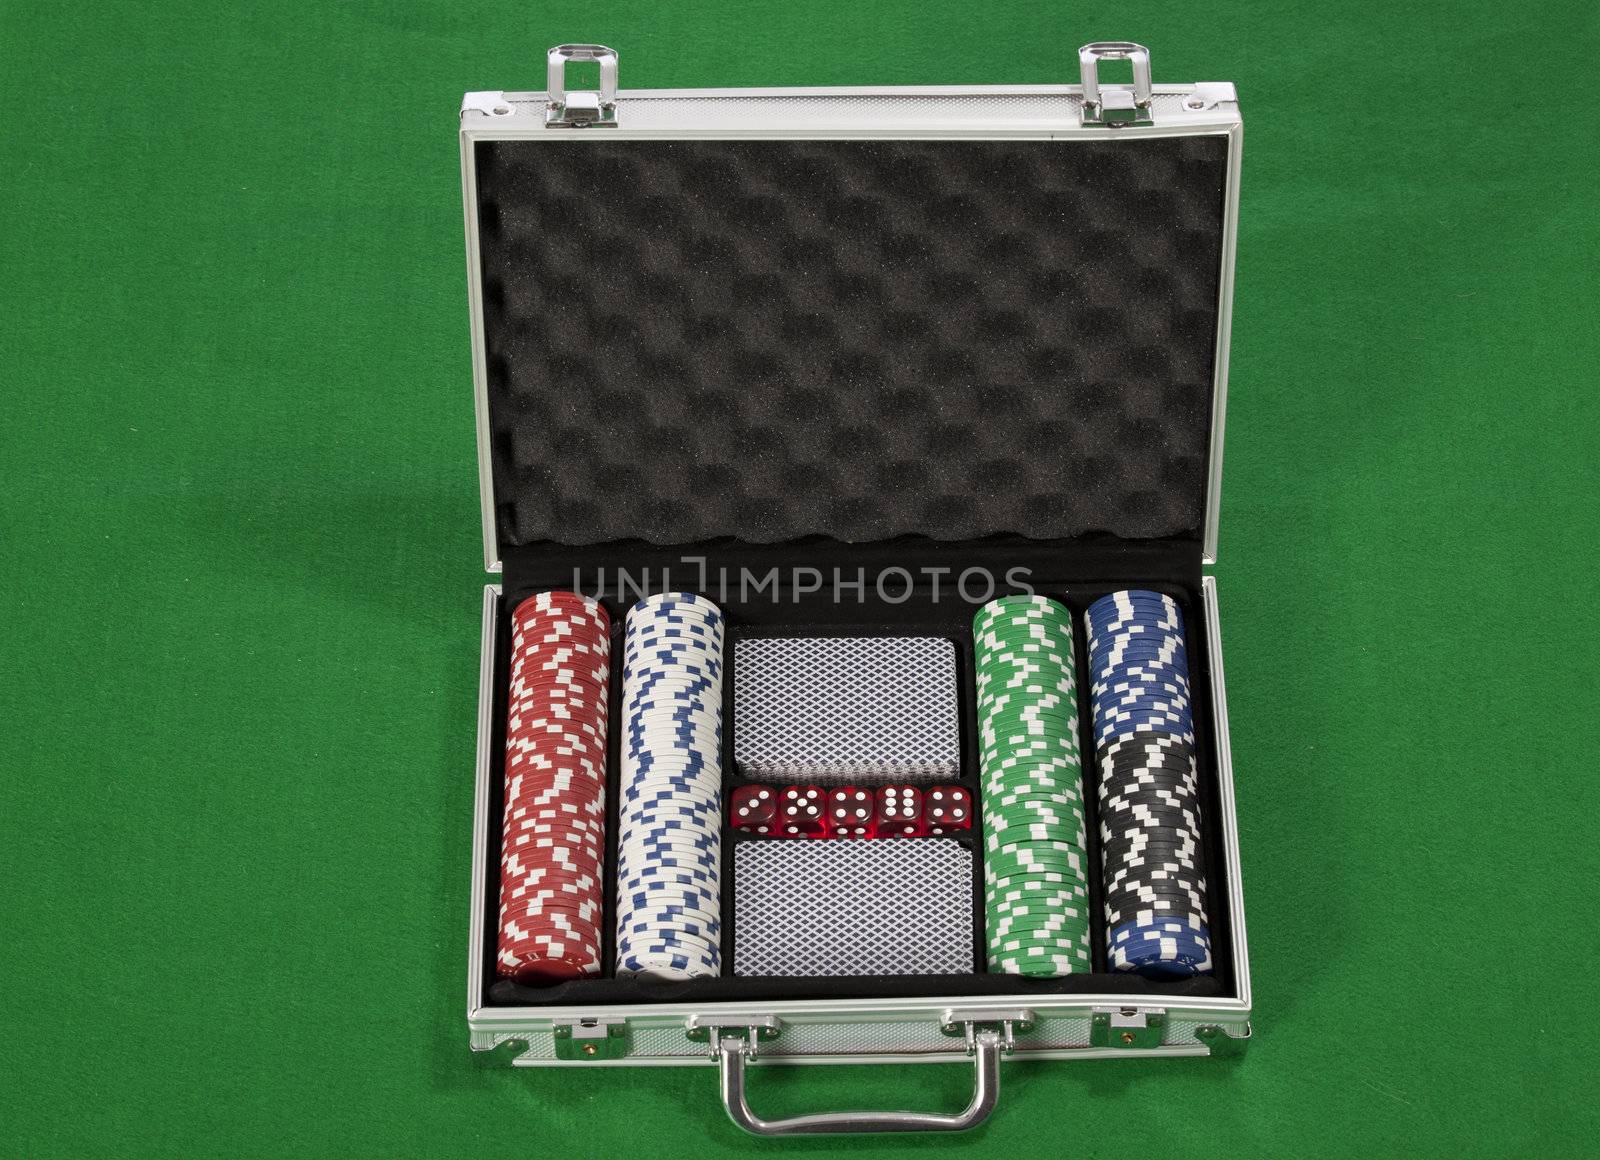 A photo of poker chips and cards in a briefcase